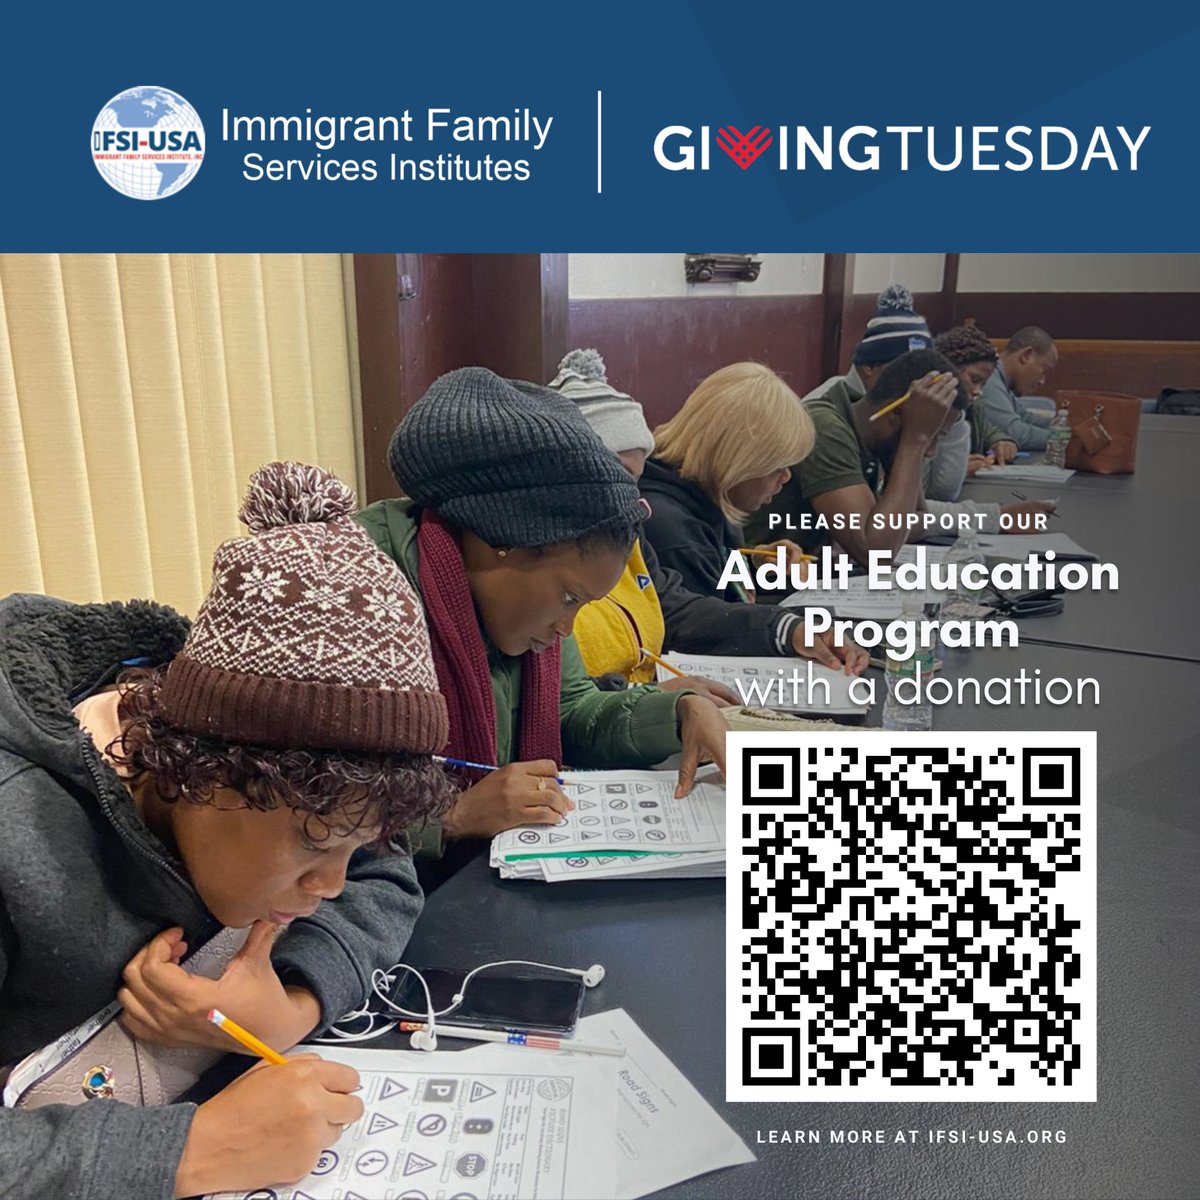 #GivingTuesday is here! Please click this link: bit.ly/3QZnSDB to support our Adult Education program with a lovely donation! Together, let's make a difference! #GivingTuesday #love #integration #unity